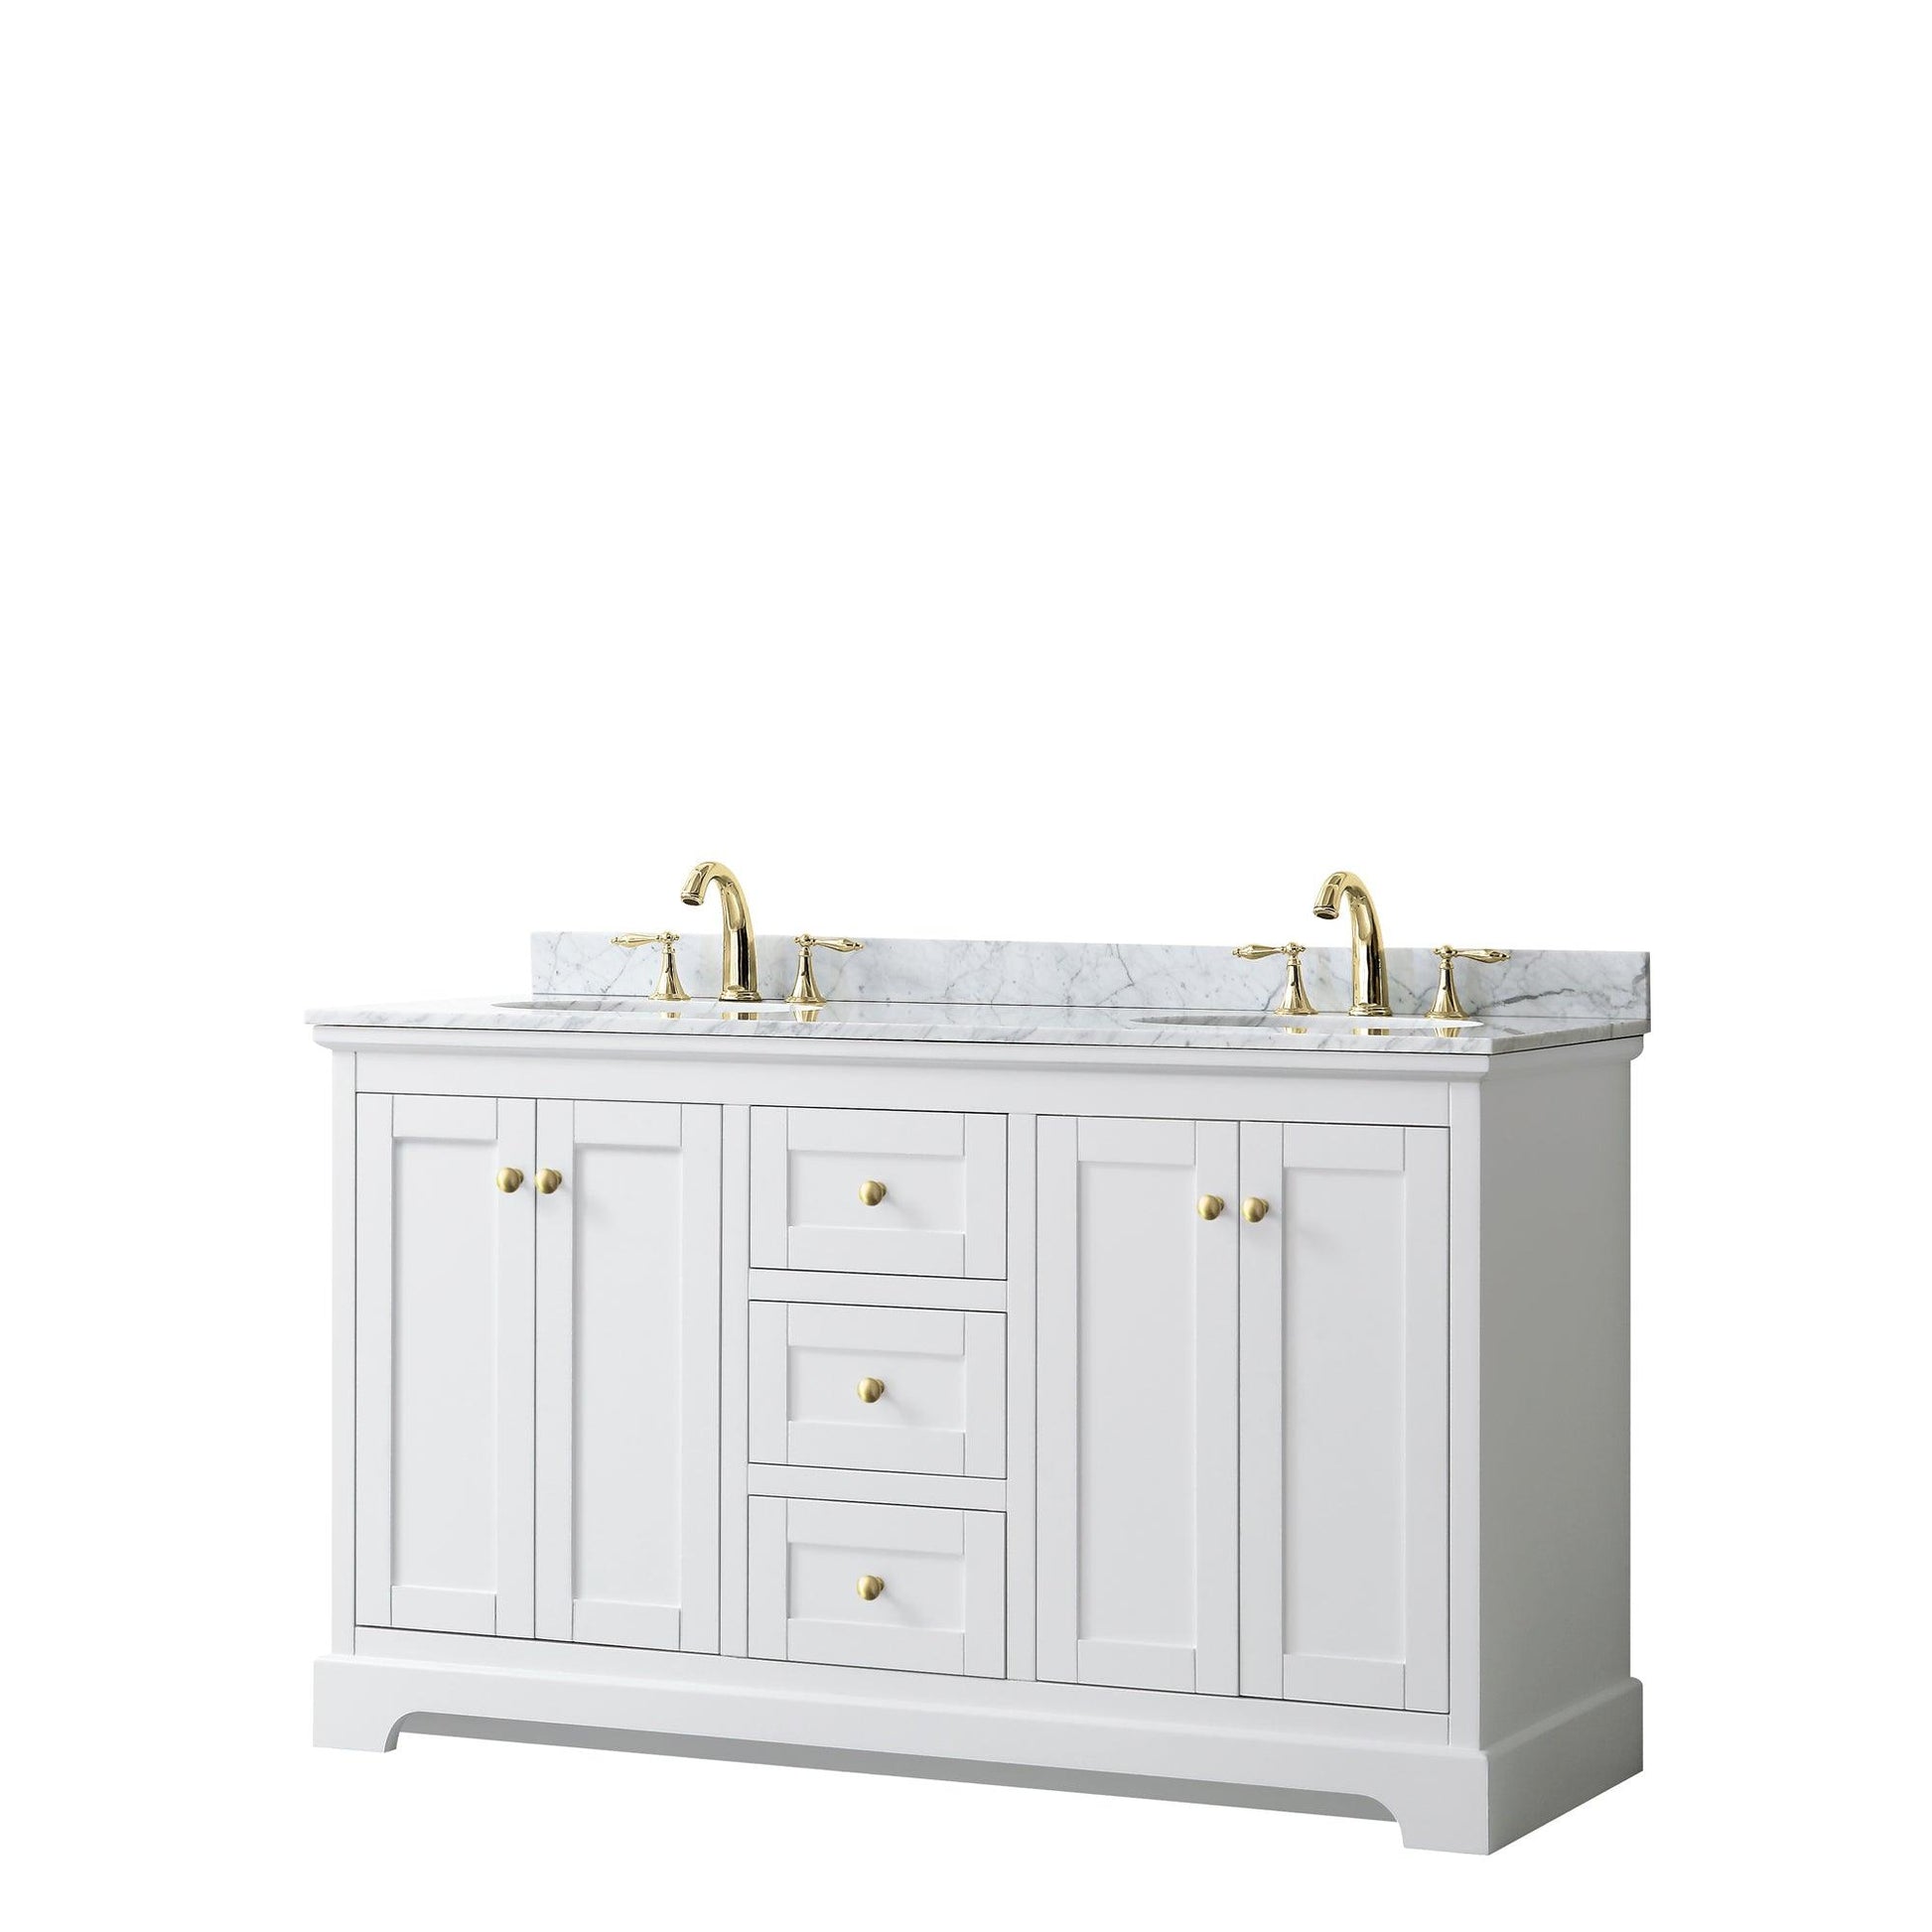 
  
  Wyndham Collection Avery Double Bathroom Vanity in White, White Carrara Marble Countertop, Undermount Oval Sinks, Optional Mirror, Brushed Gold Trim
  
